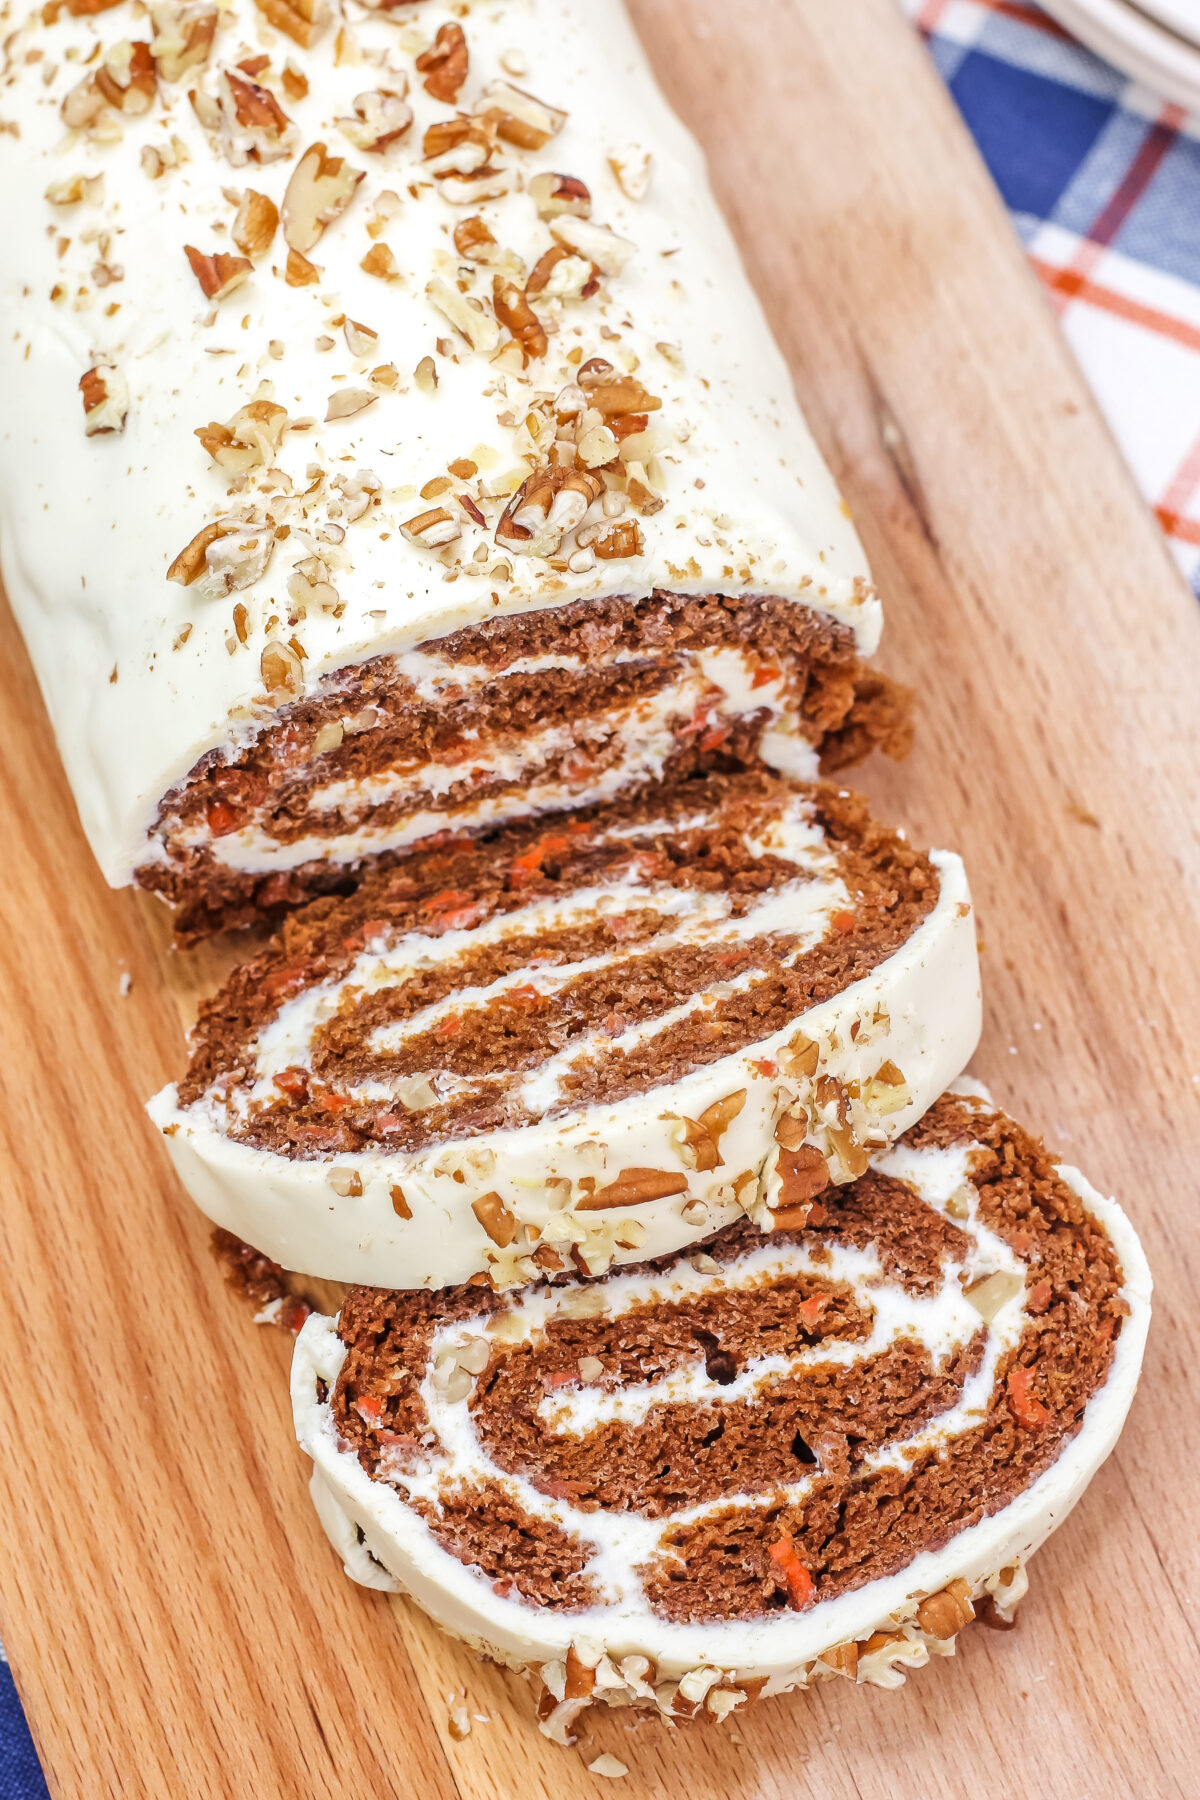 Here is a yummy recipe for Carrot Cake Roll with Cream Cheese Filling with a moist and tender crumb. It's the perfect dessert for Easter!